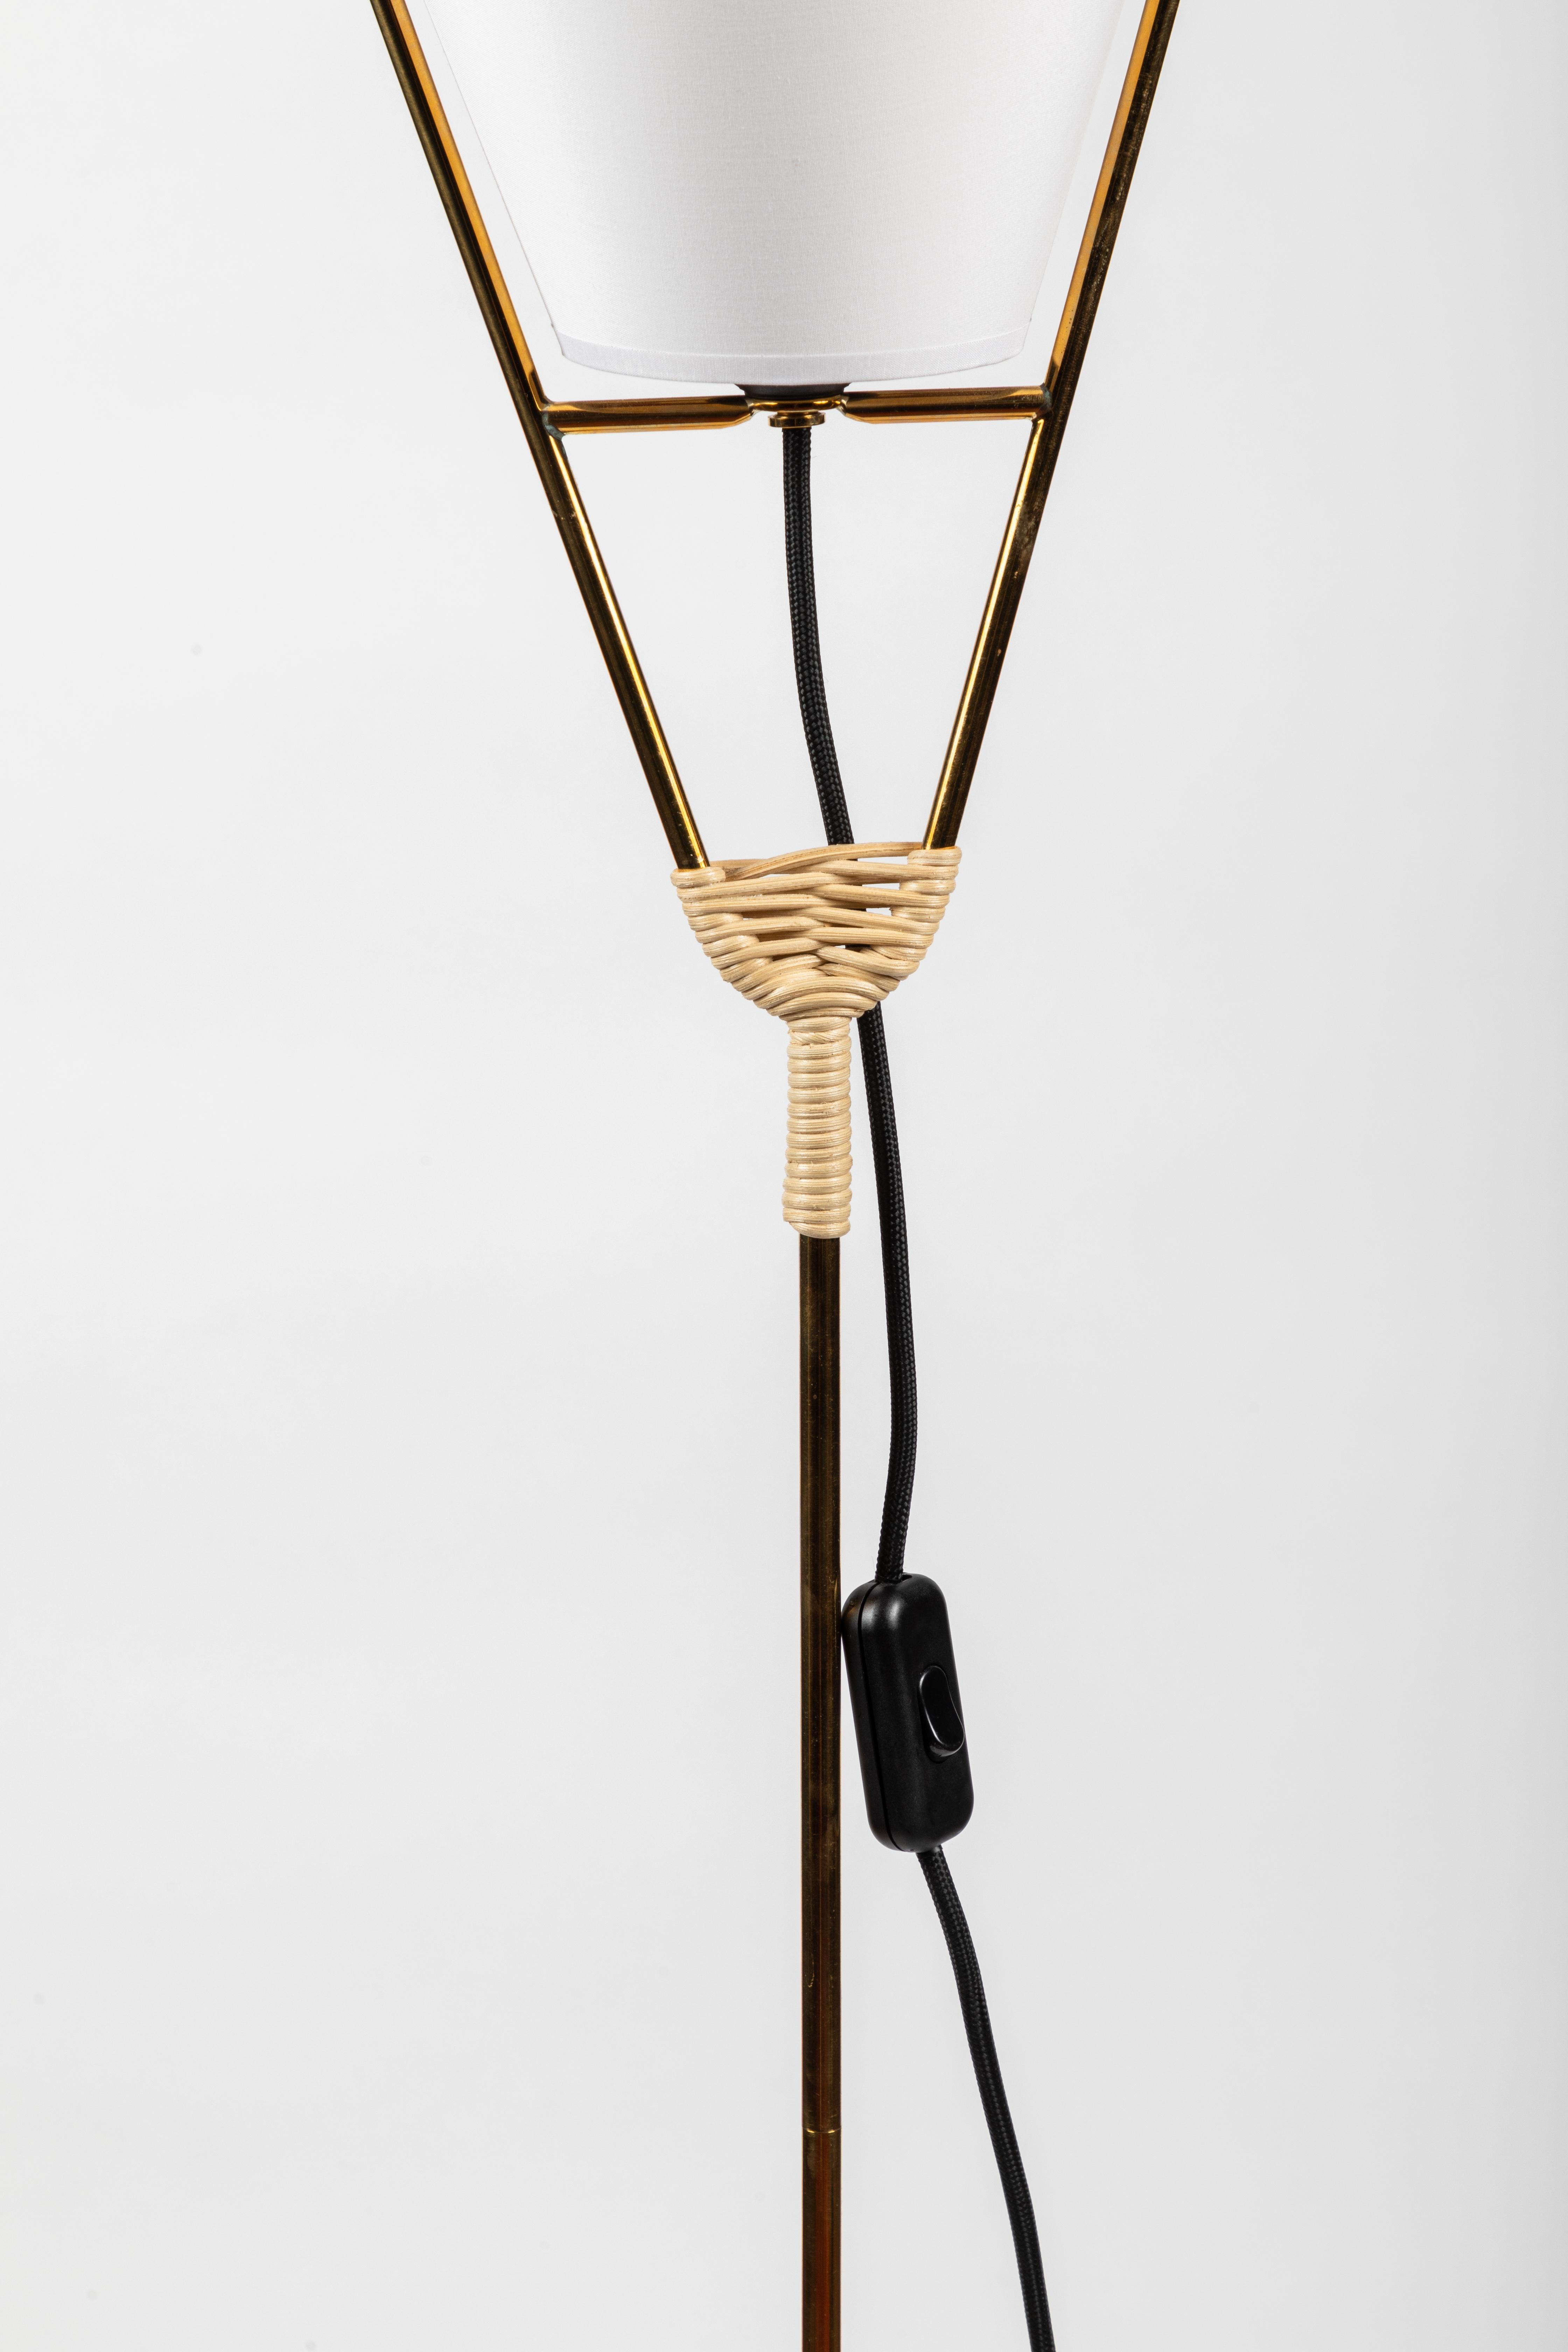 Carl Auböck Vice Versa Floor Lamp In New Condition For Sale In Glendale, CA